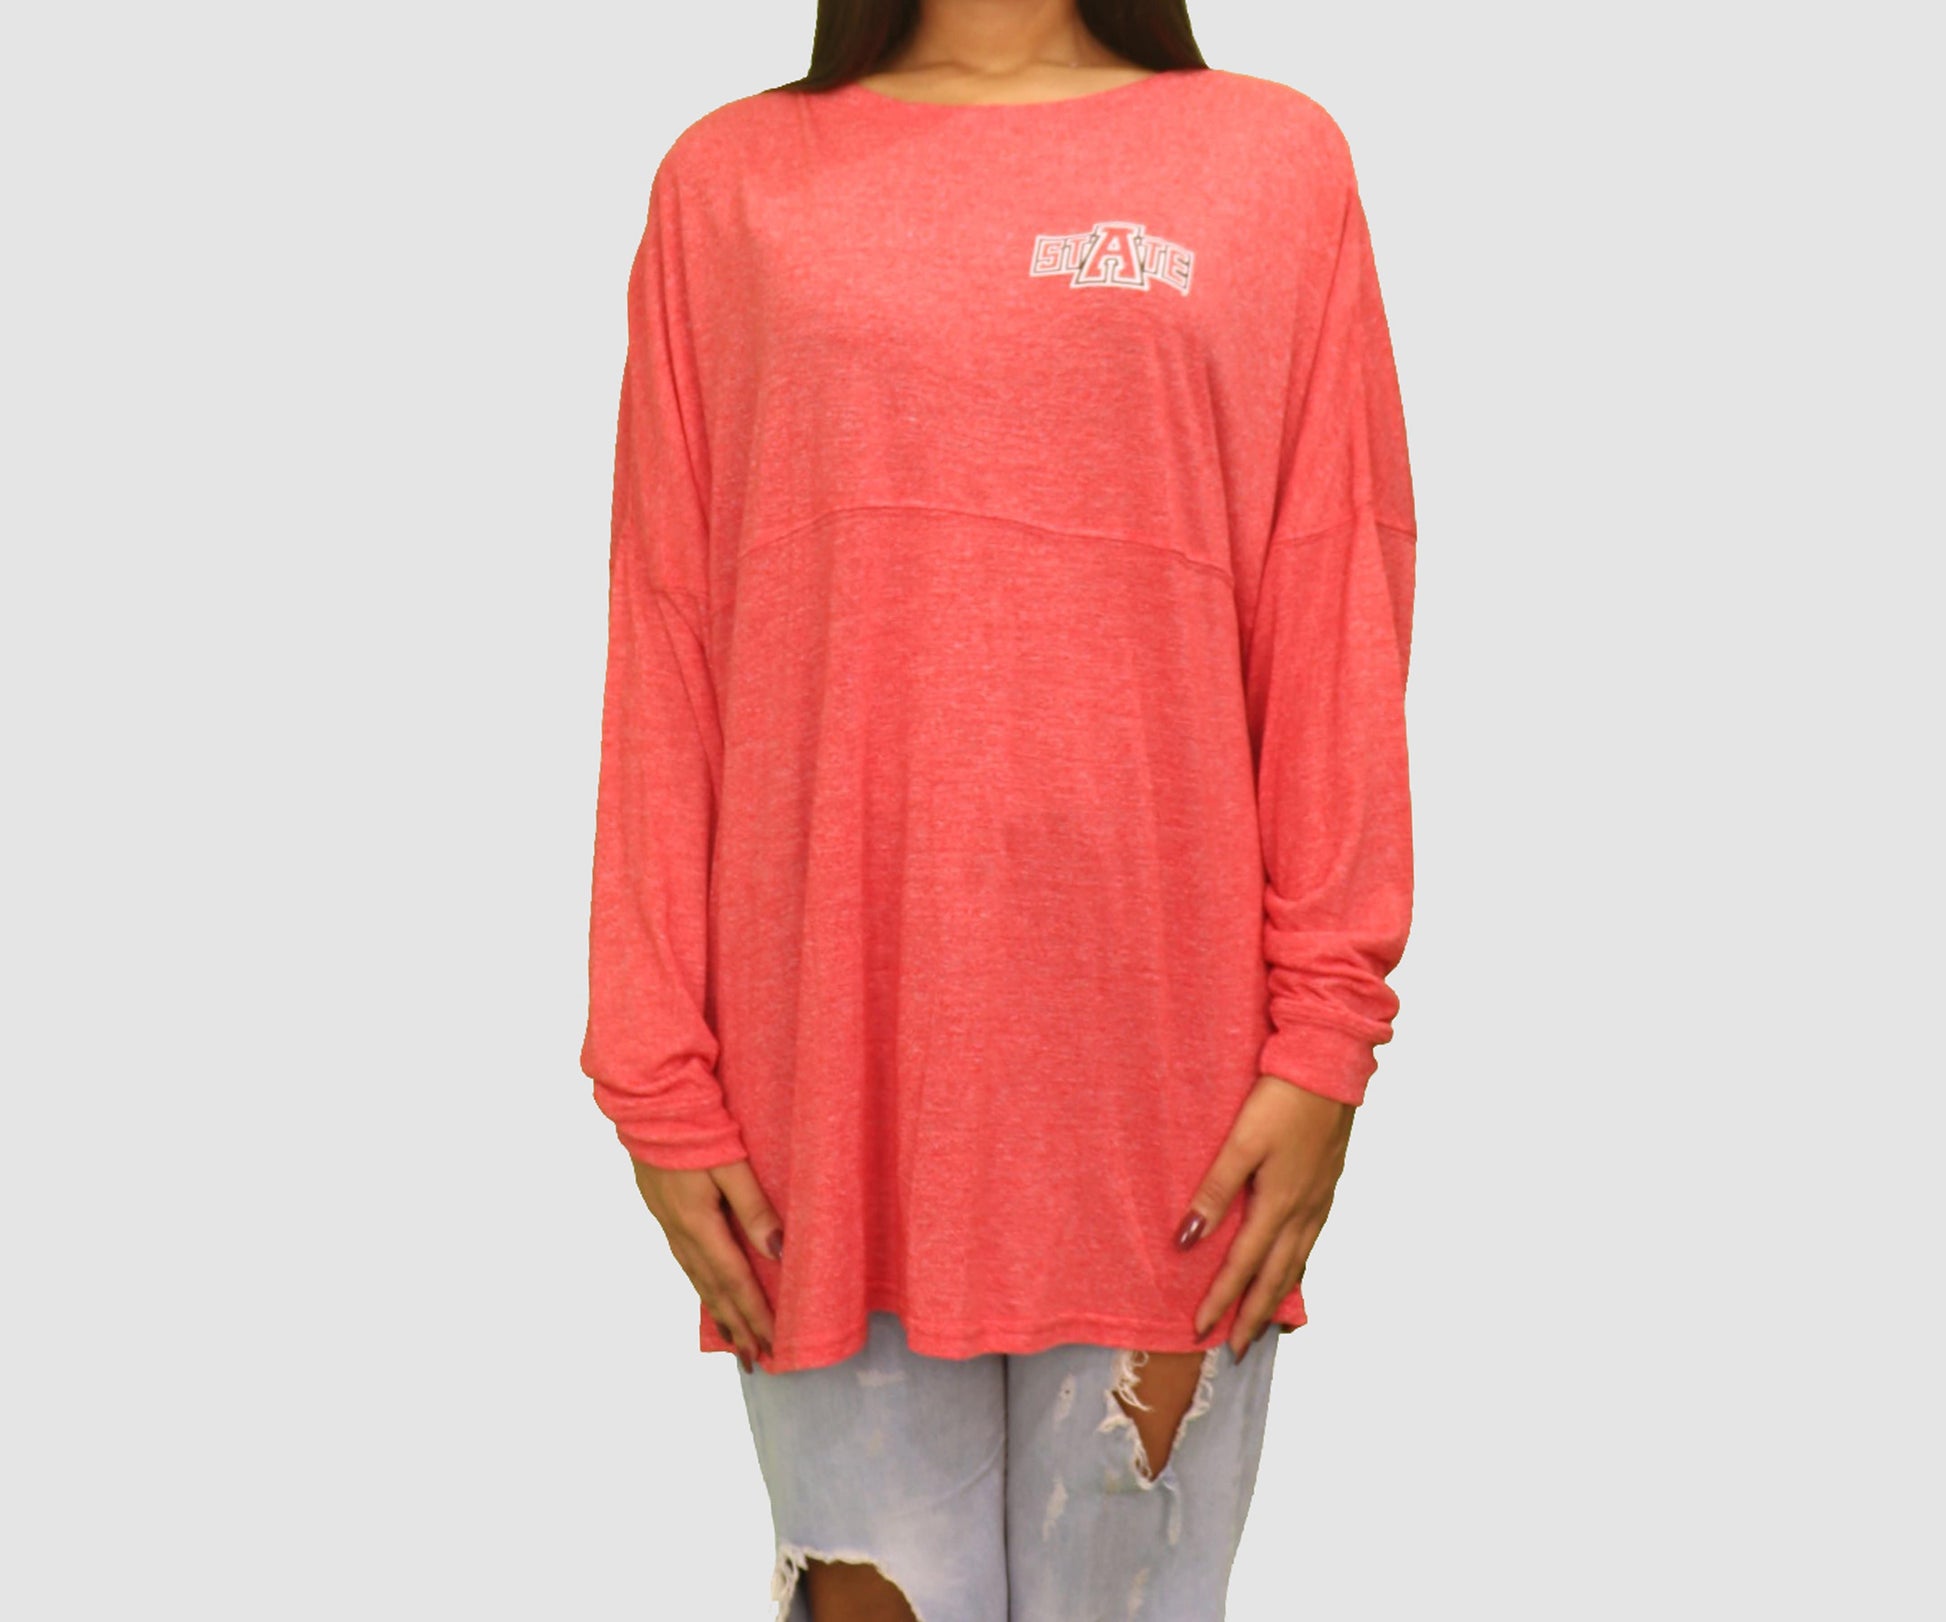 Chicka~d Womens Tops L / Red Long Sleeve Top